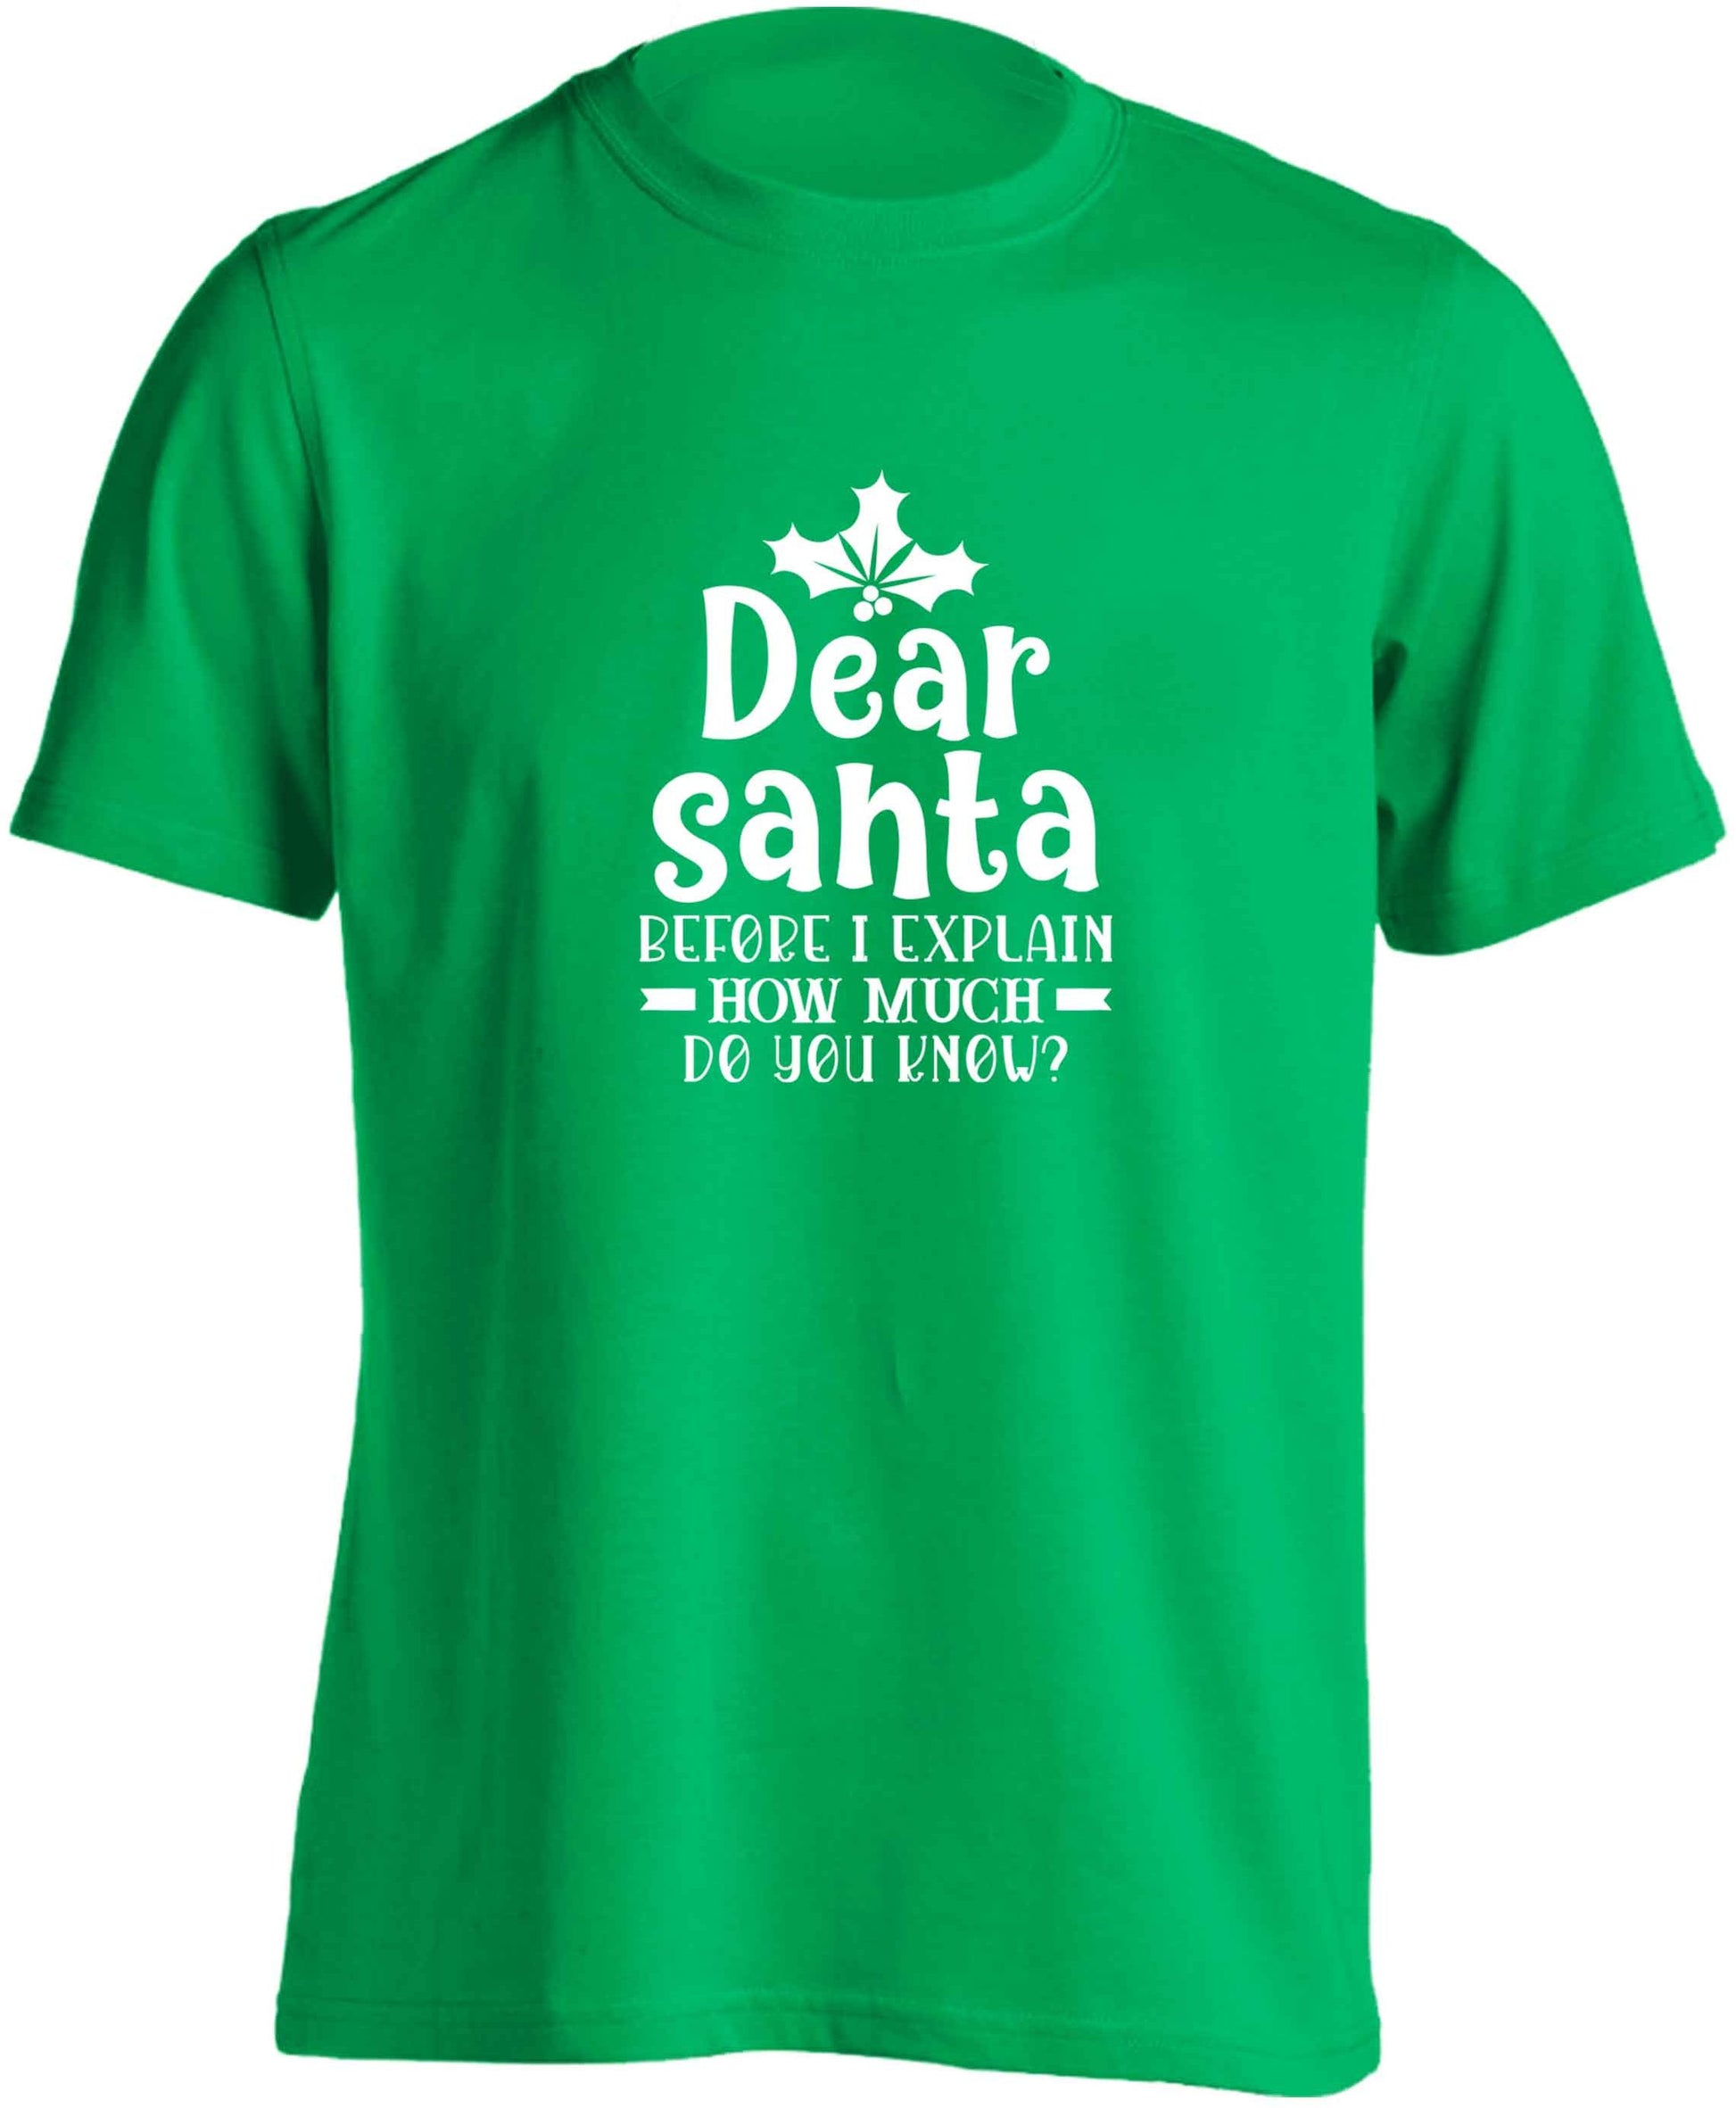 Santa before I explain how much do you know? adults unisex green Tshirt 2XL